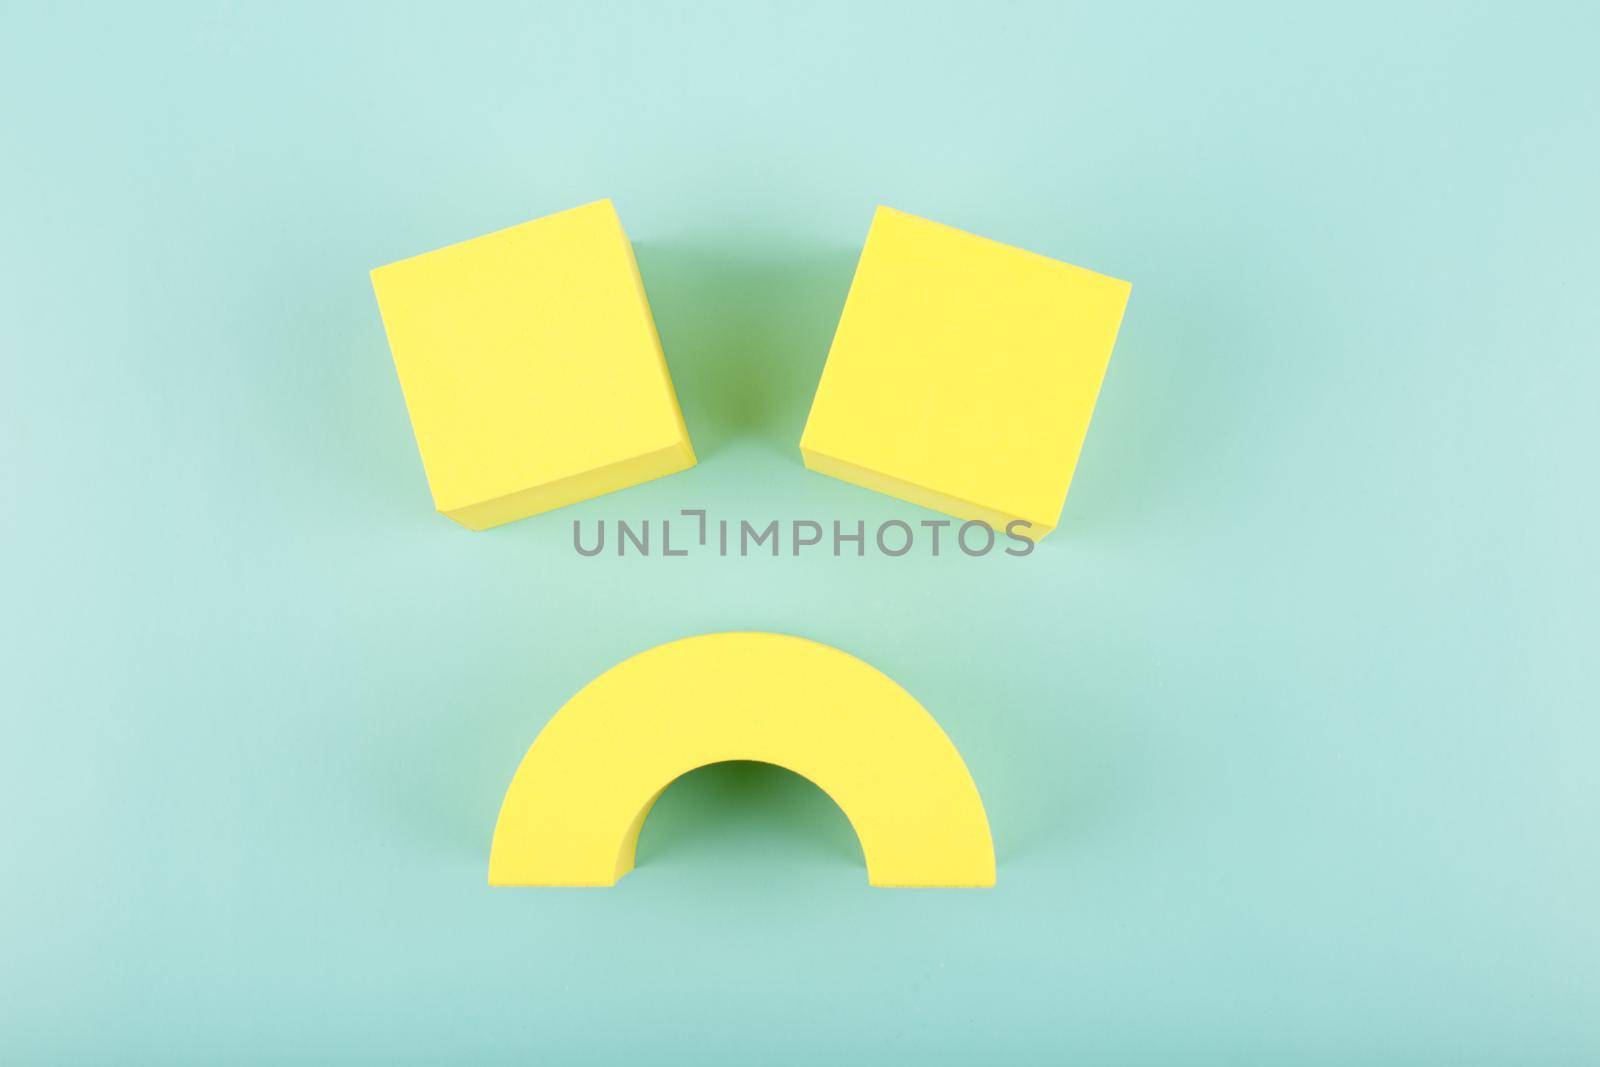 Creative flat lay with unhappy, sad smile symbol made of yellow figures on blue background. Concept of emotions, emoji, mental health or unsatisfied customer or bad service